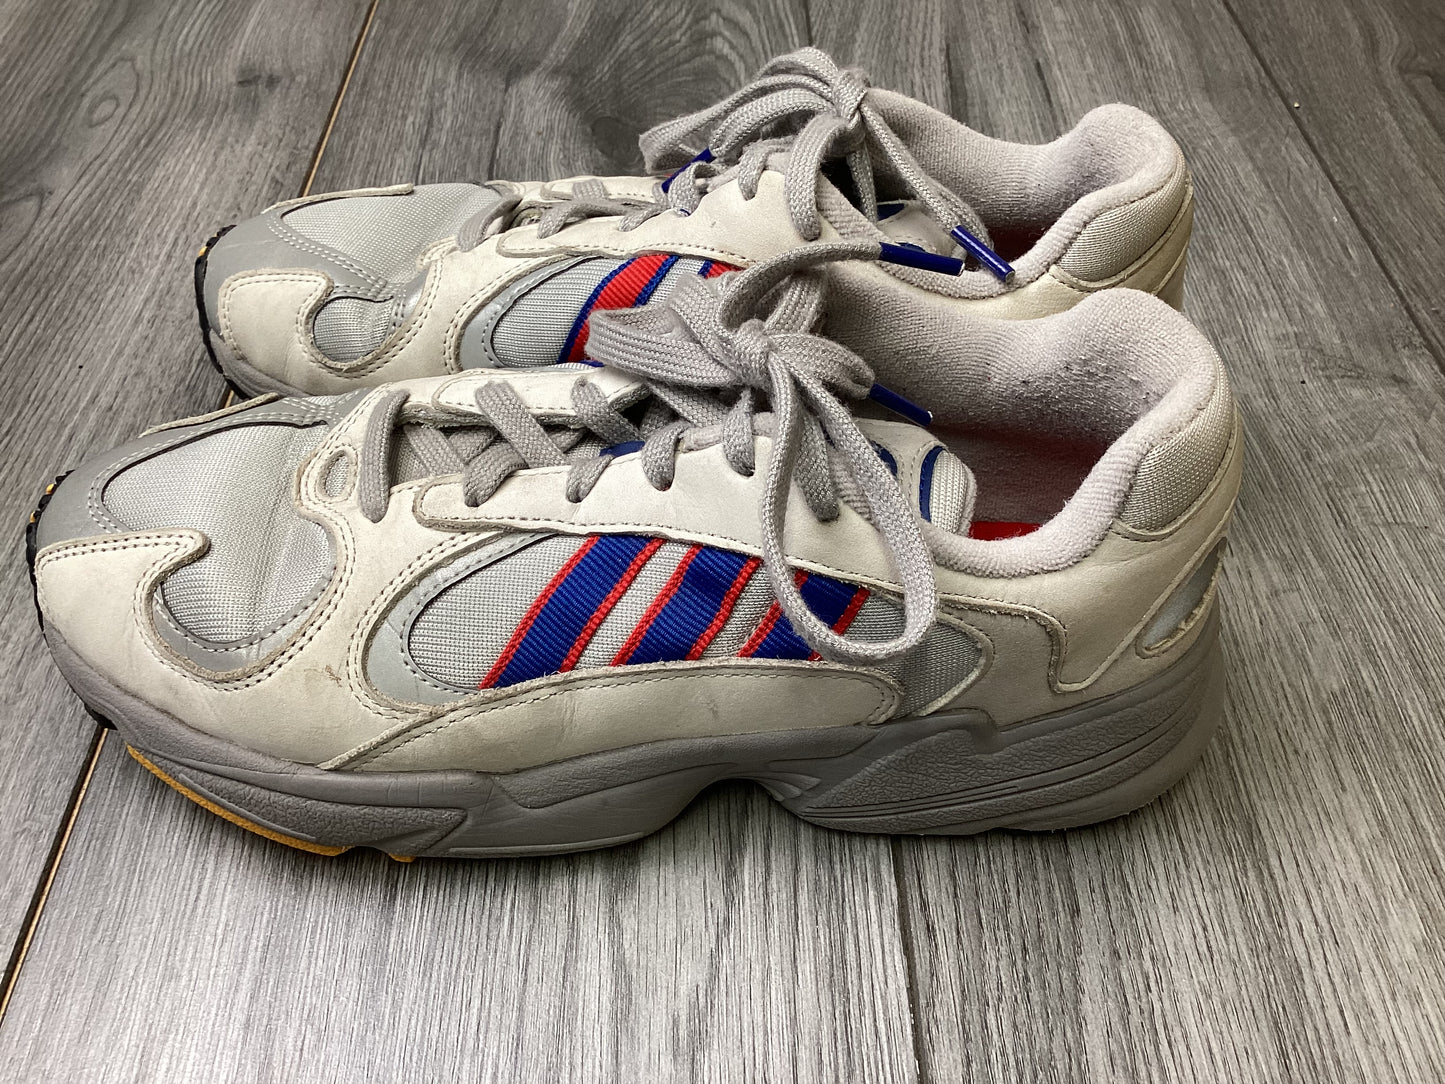 Adidas Yung 1 Grey Blue and Red Trainers UK7